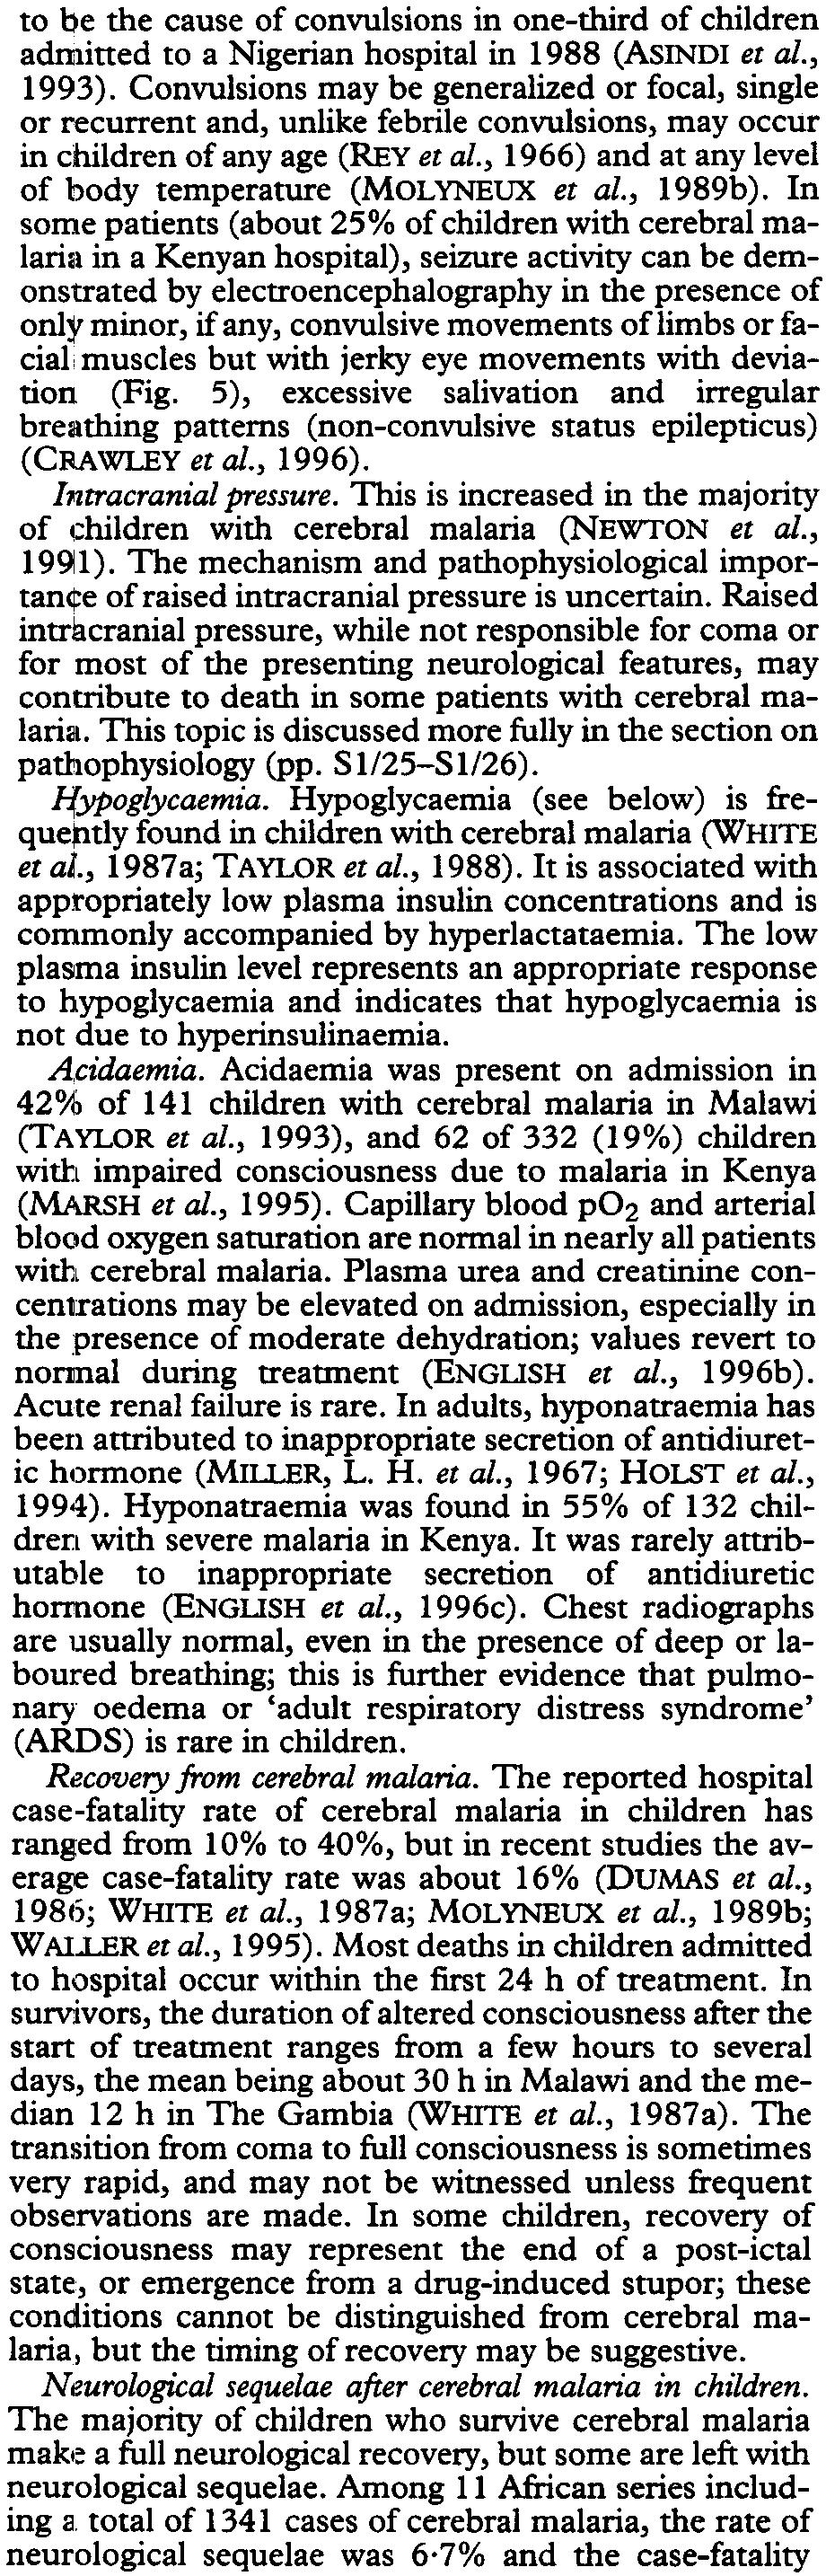 SI/8 SEVERE FALCIPARUM MALARIA to be the cause of convulsions in one-third of children admitted to a Nigerian hospital in 1988 (ASINDI et al., 1993).